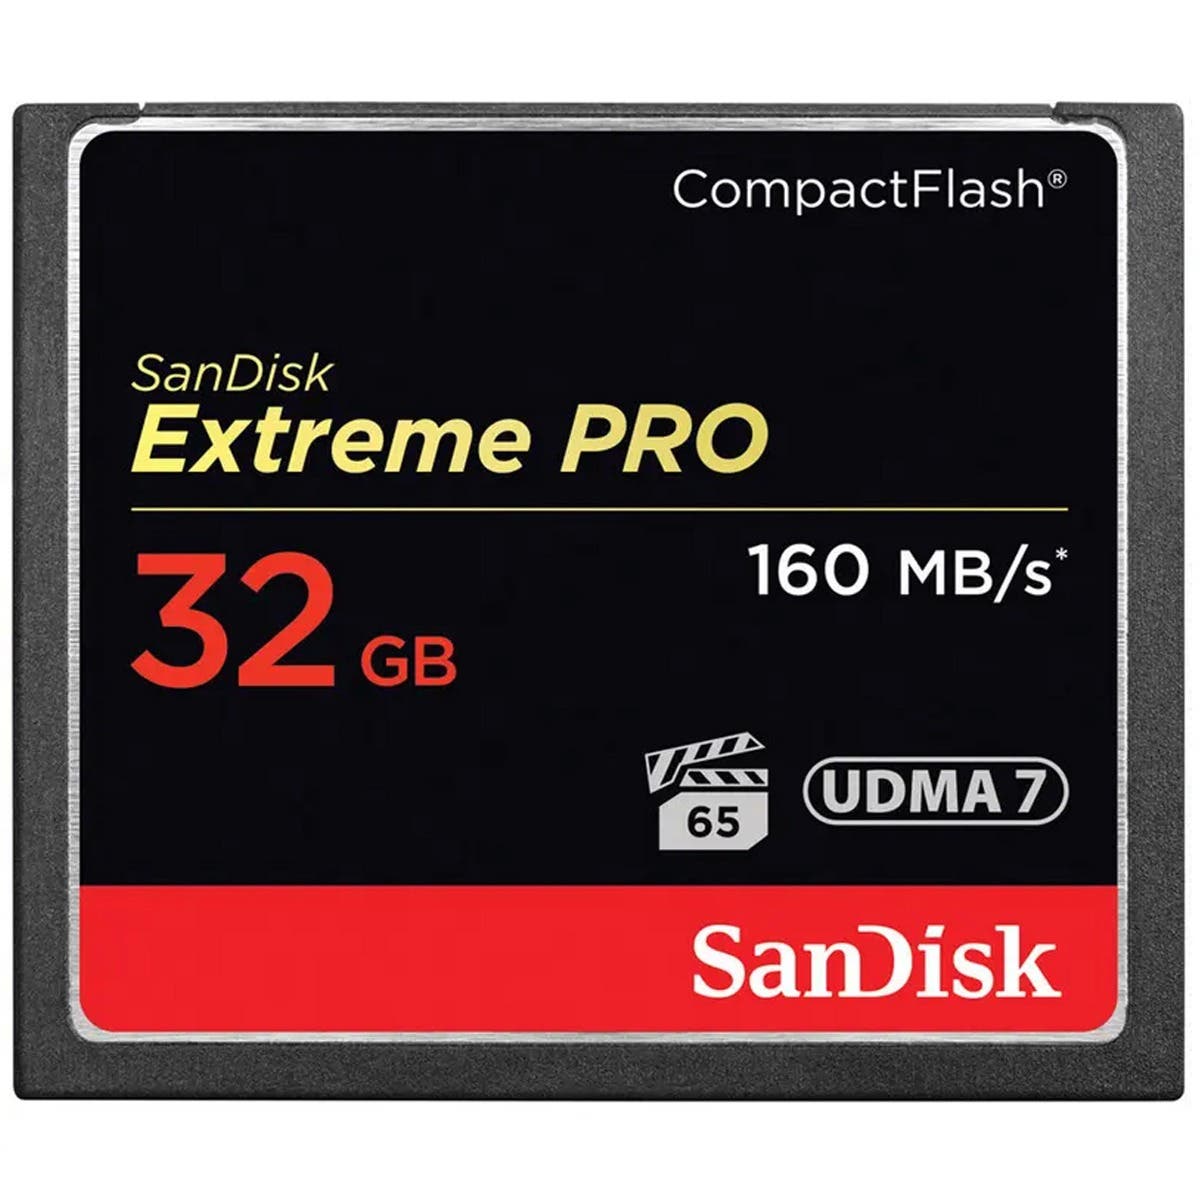 SanDisk 32GB Extreme PRO CompactFlash Memory Card (160Mb/s)